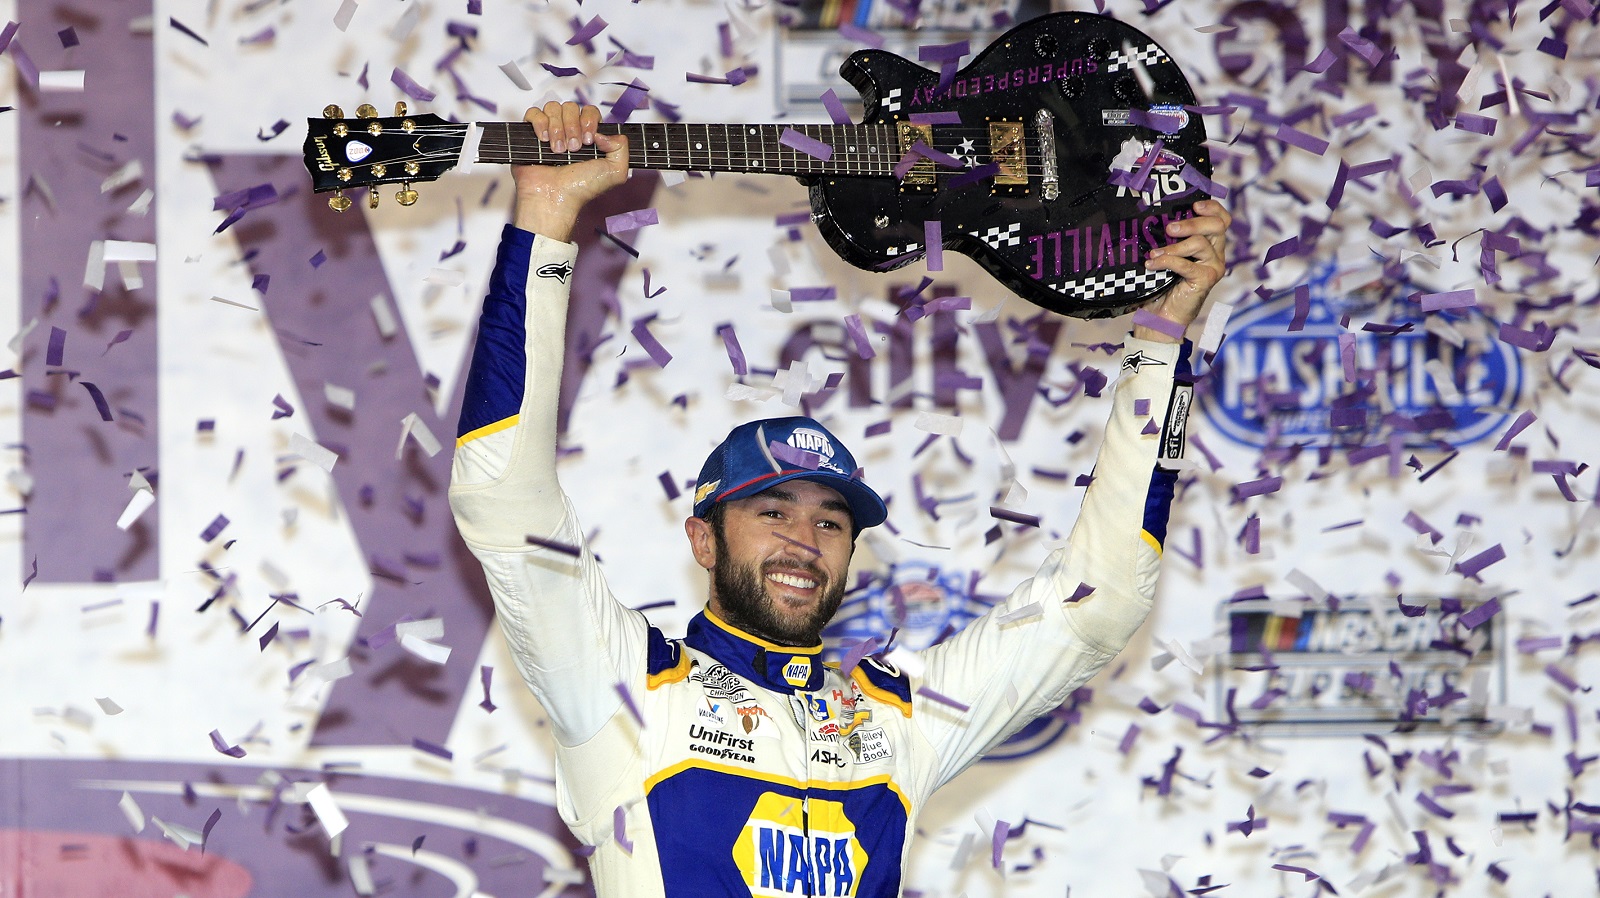 Chase Elliott celebrates after winning the NASCAR Cup Series Ally 400 on June 26, 2022. | Jeff Robinson/Icon Sportswire via Getty Images